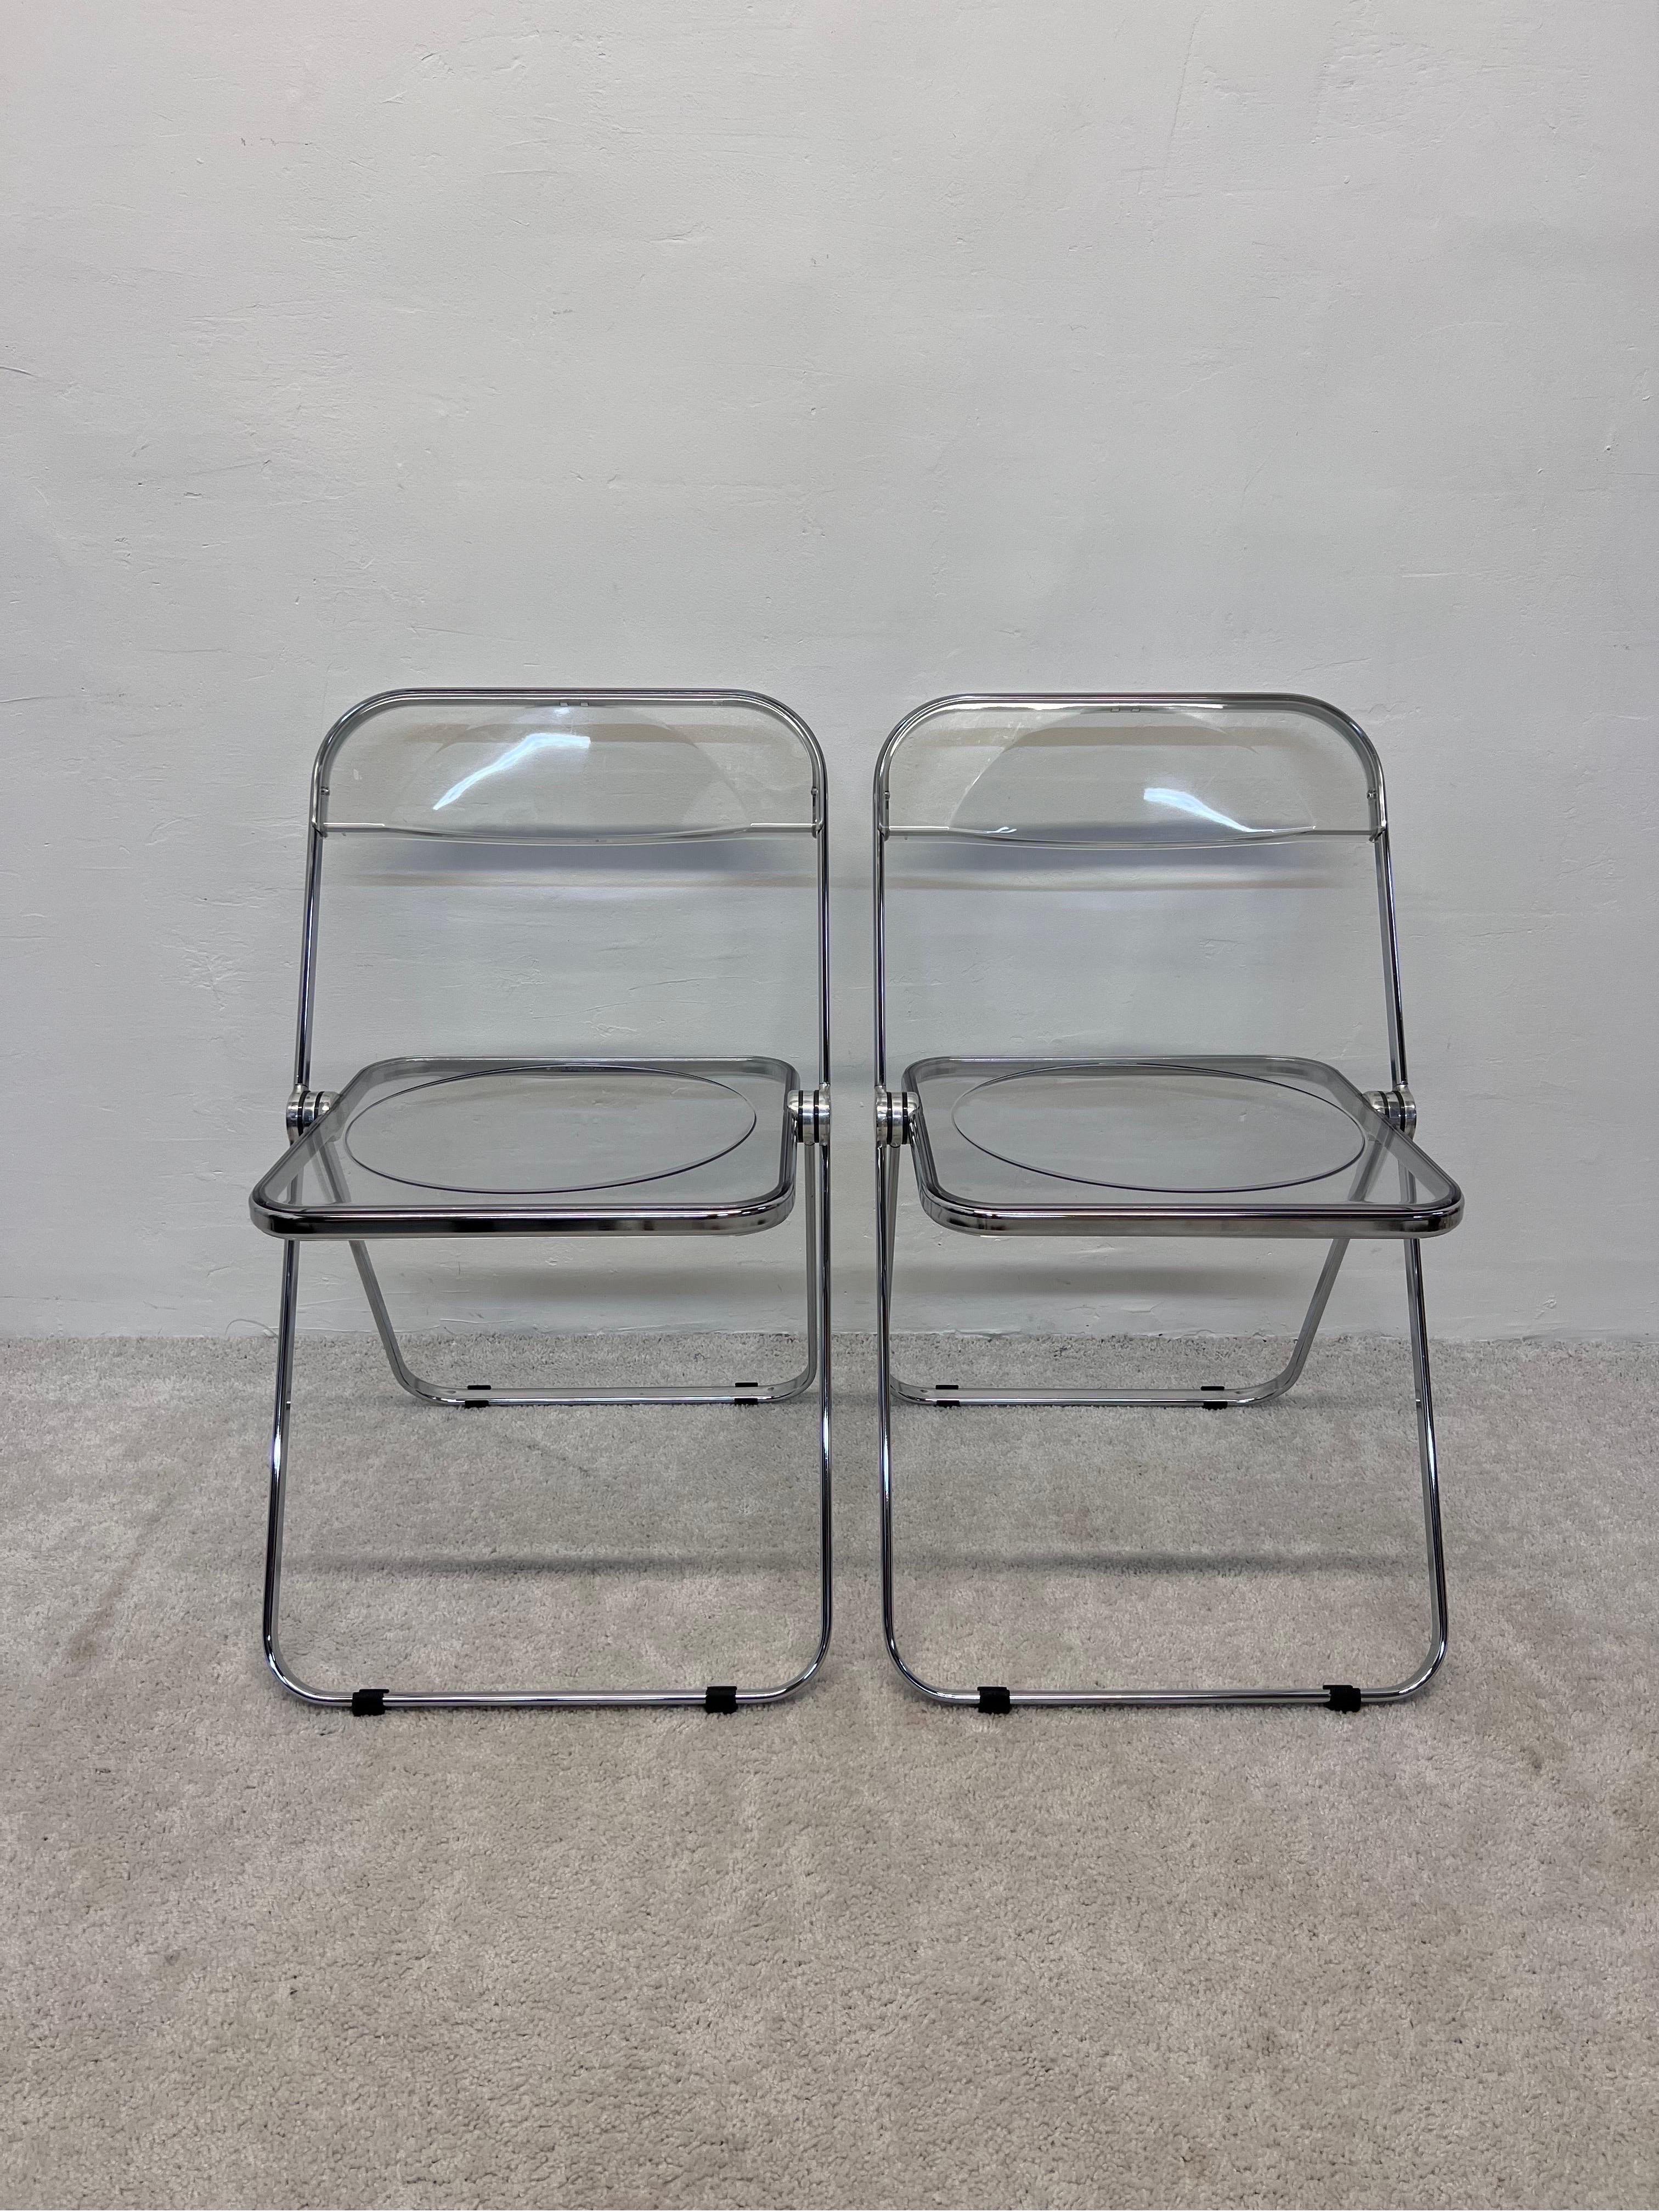 Set of two clear plastic and chrome frame folding Plia chairs by Giancarlo Piretti for Castelli, 1970s.